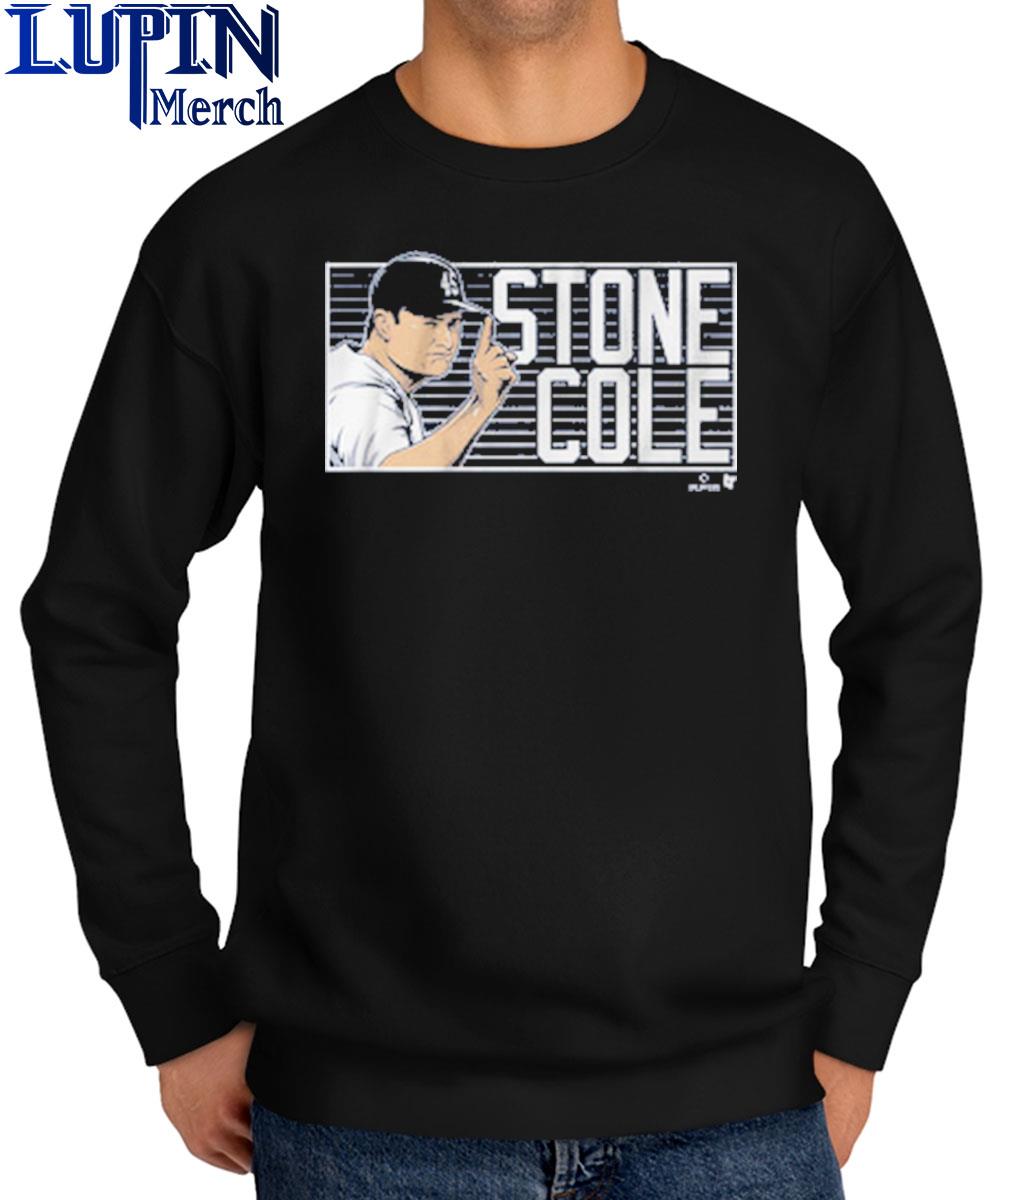 Gerrit cole stone cole shirt, hoodie, sweater, long sleeve and tank top